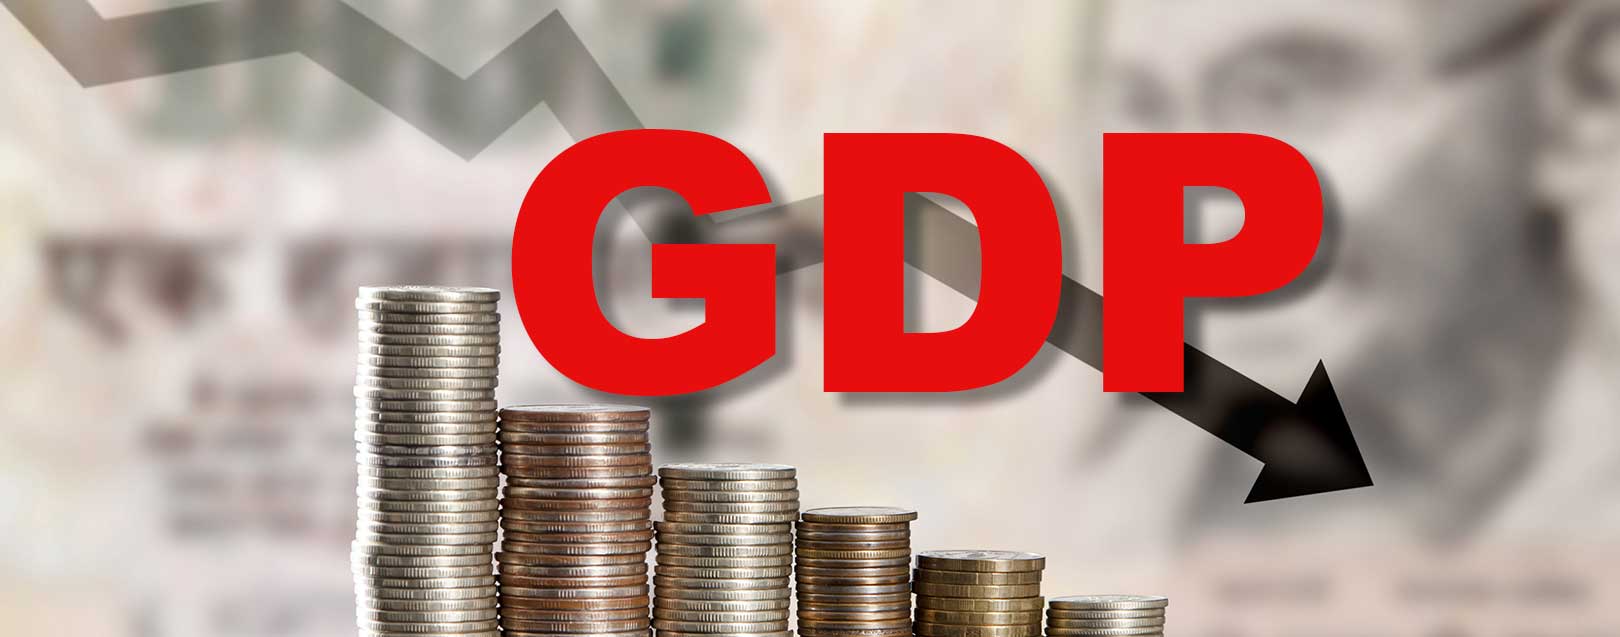 Demonetisation may slow down the growth of GDP in the short-term